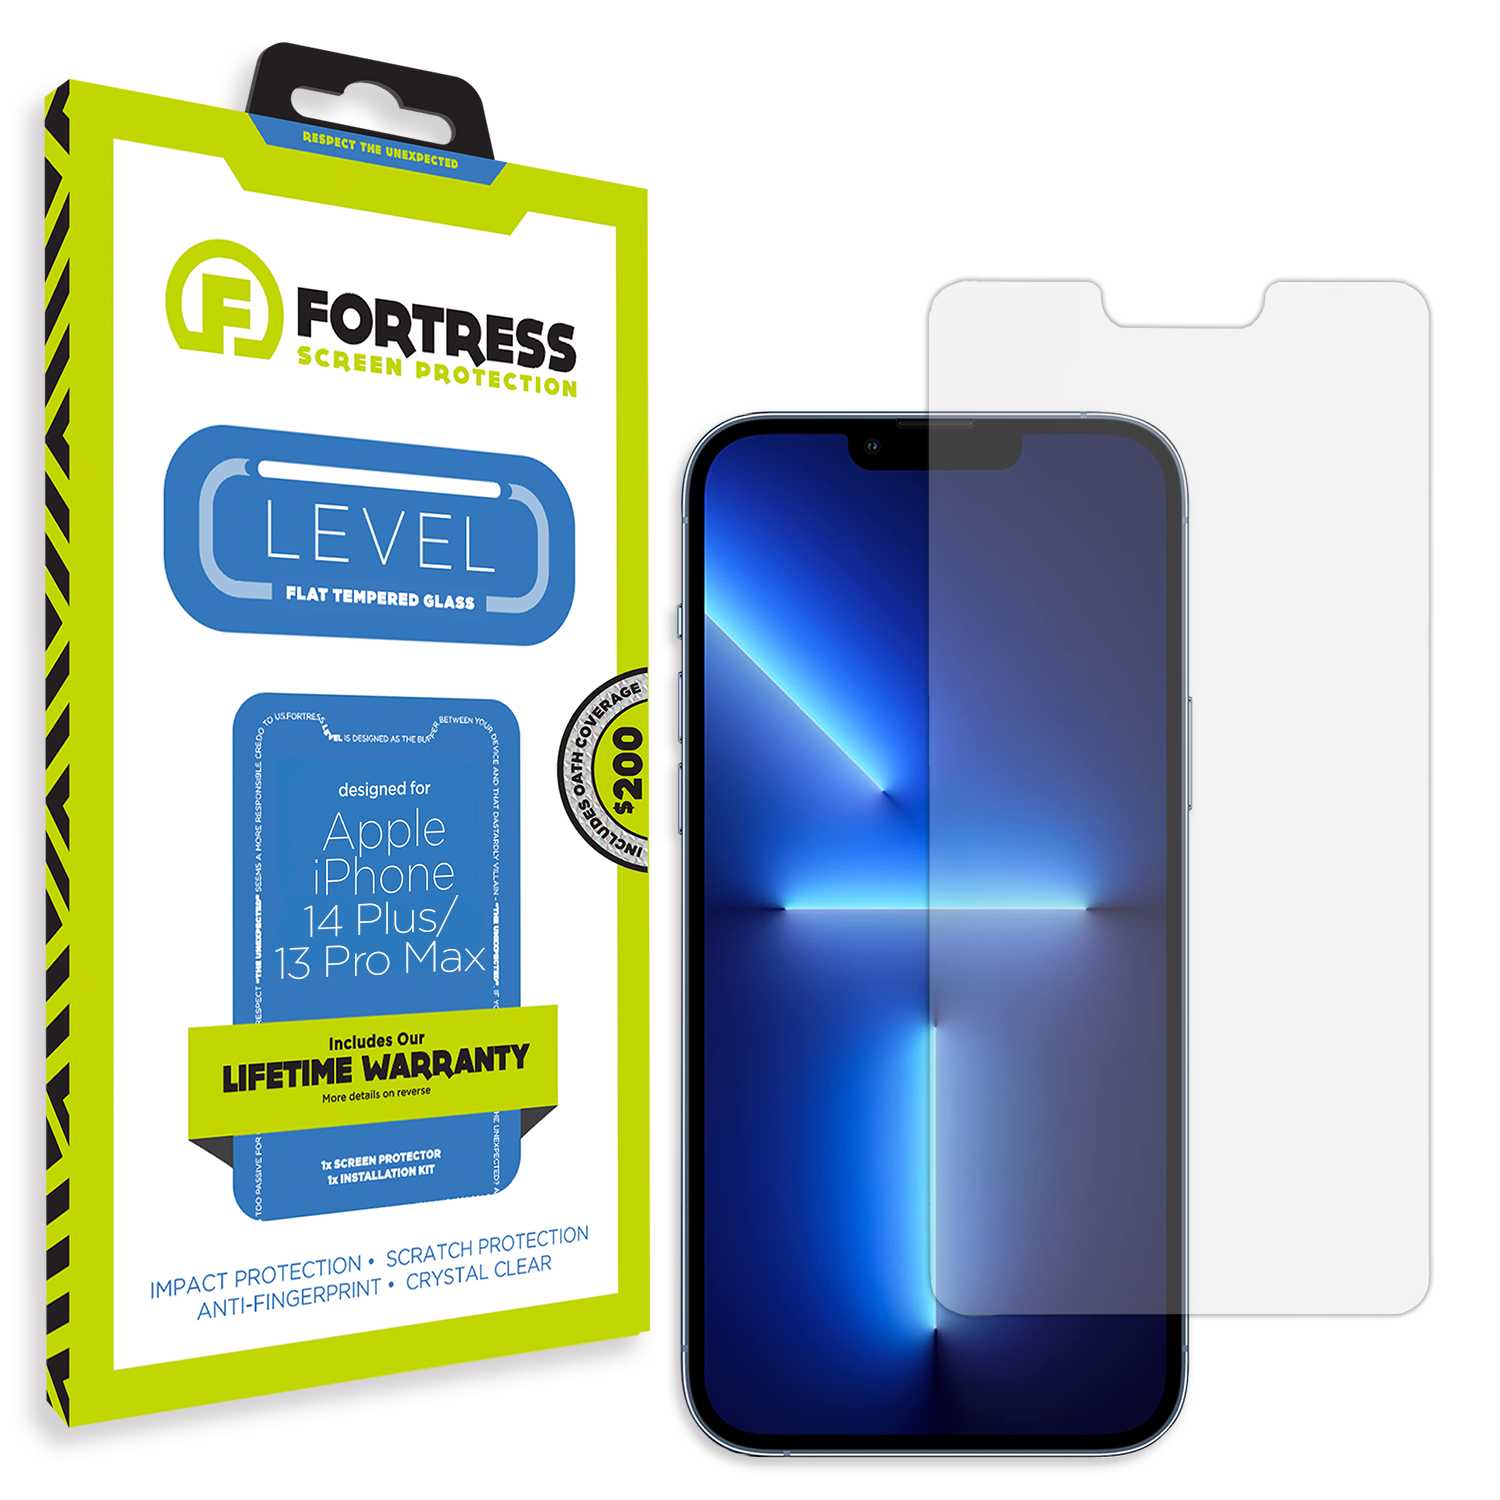 Fortress iPhone 14 Plus Screen Protector $200Coverage Scooch Screen Protector